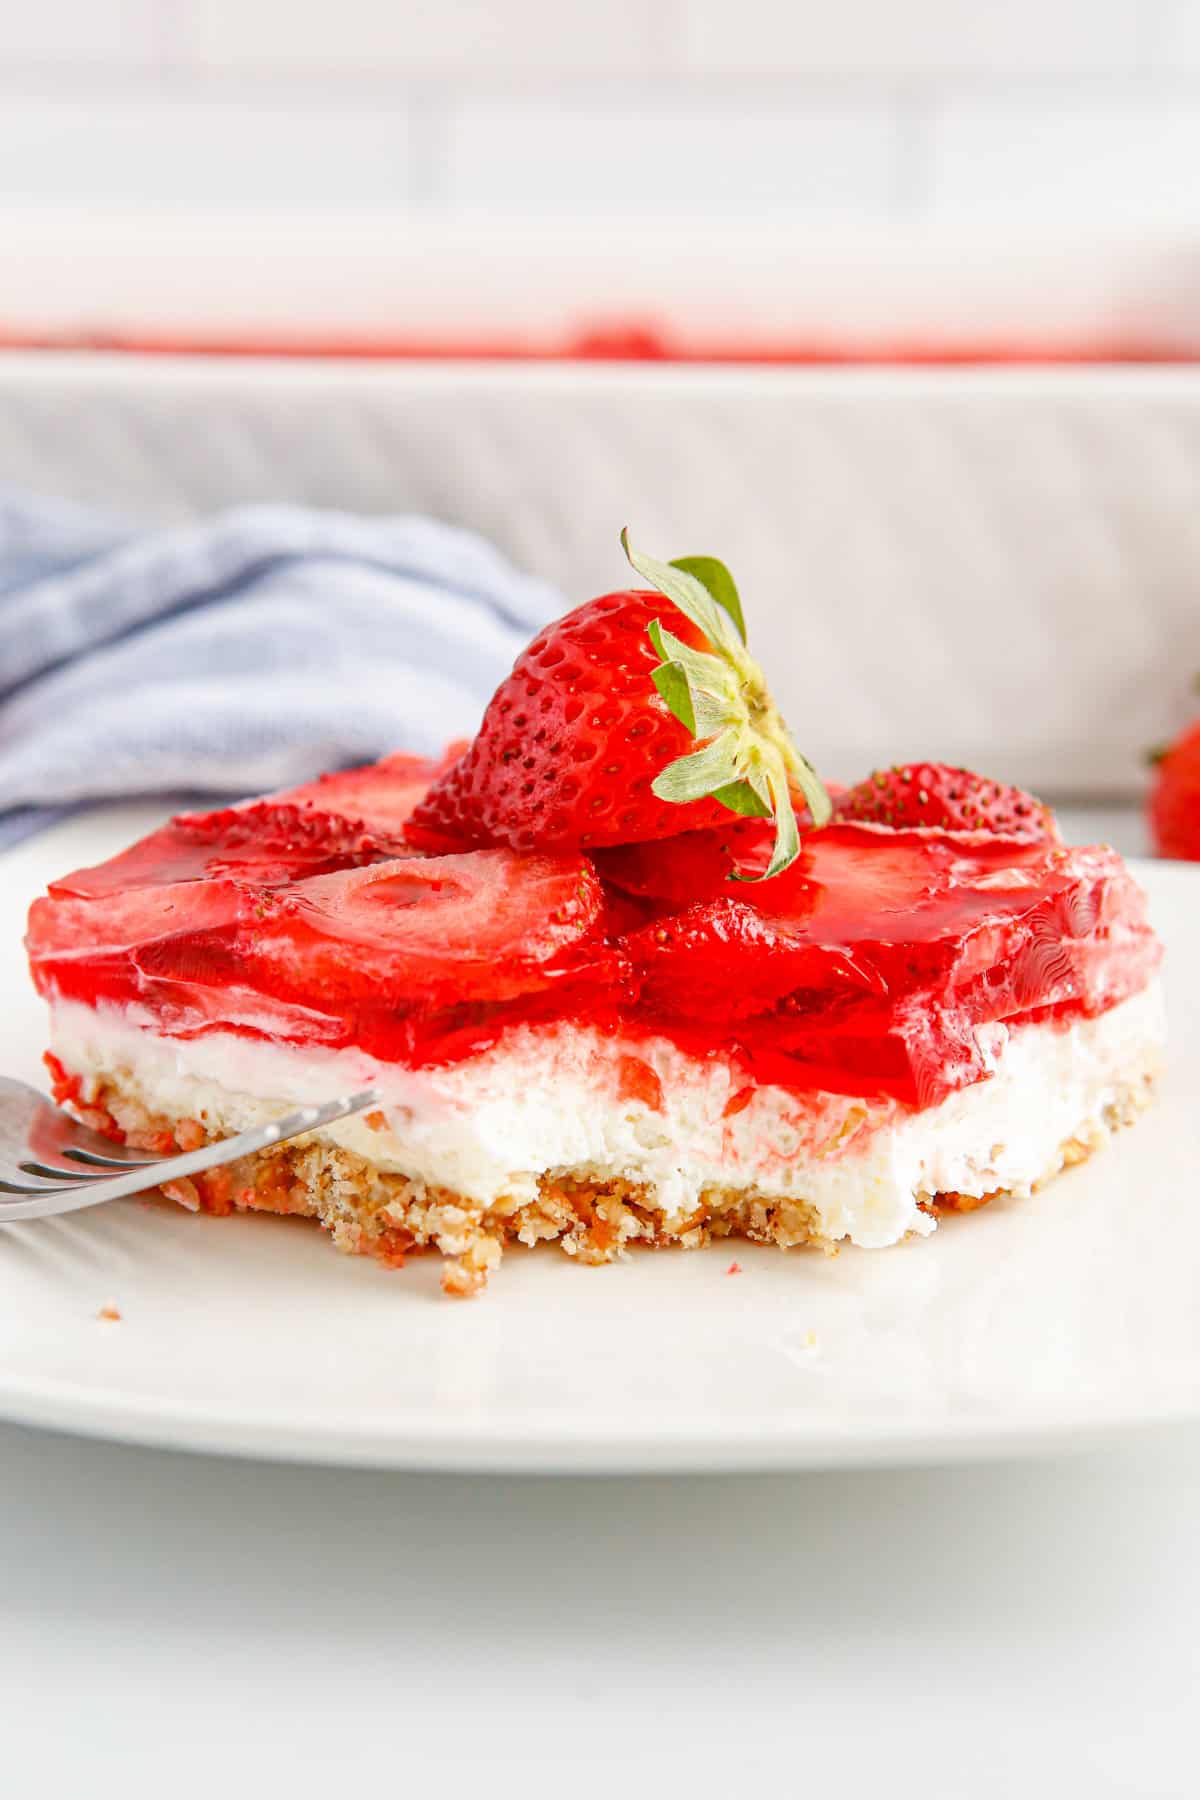 Strawberry pretzel salad on white plate with piece taken out with a fork.